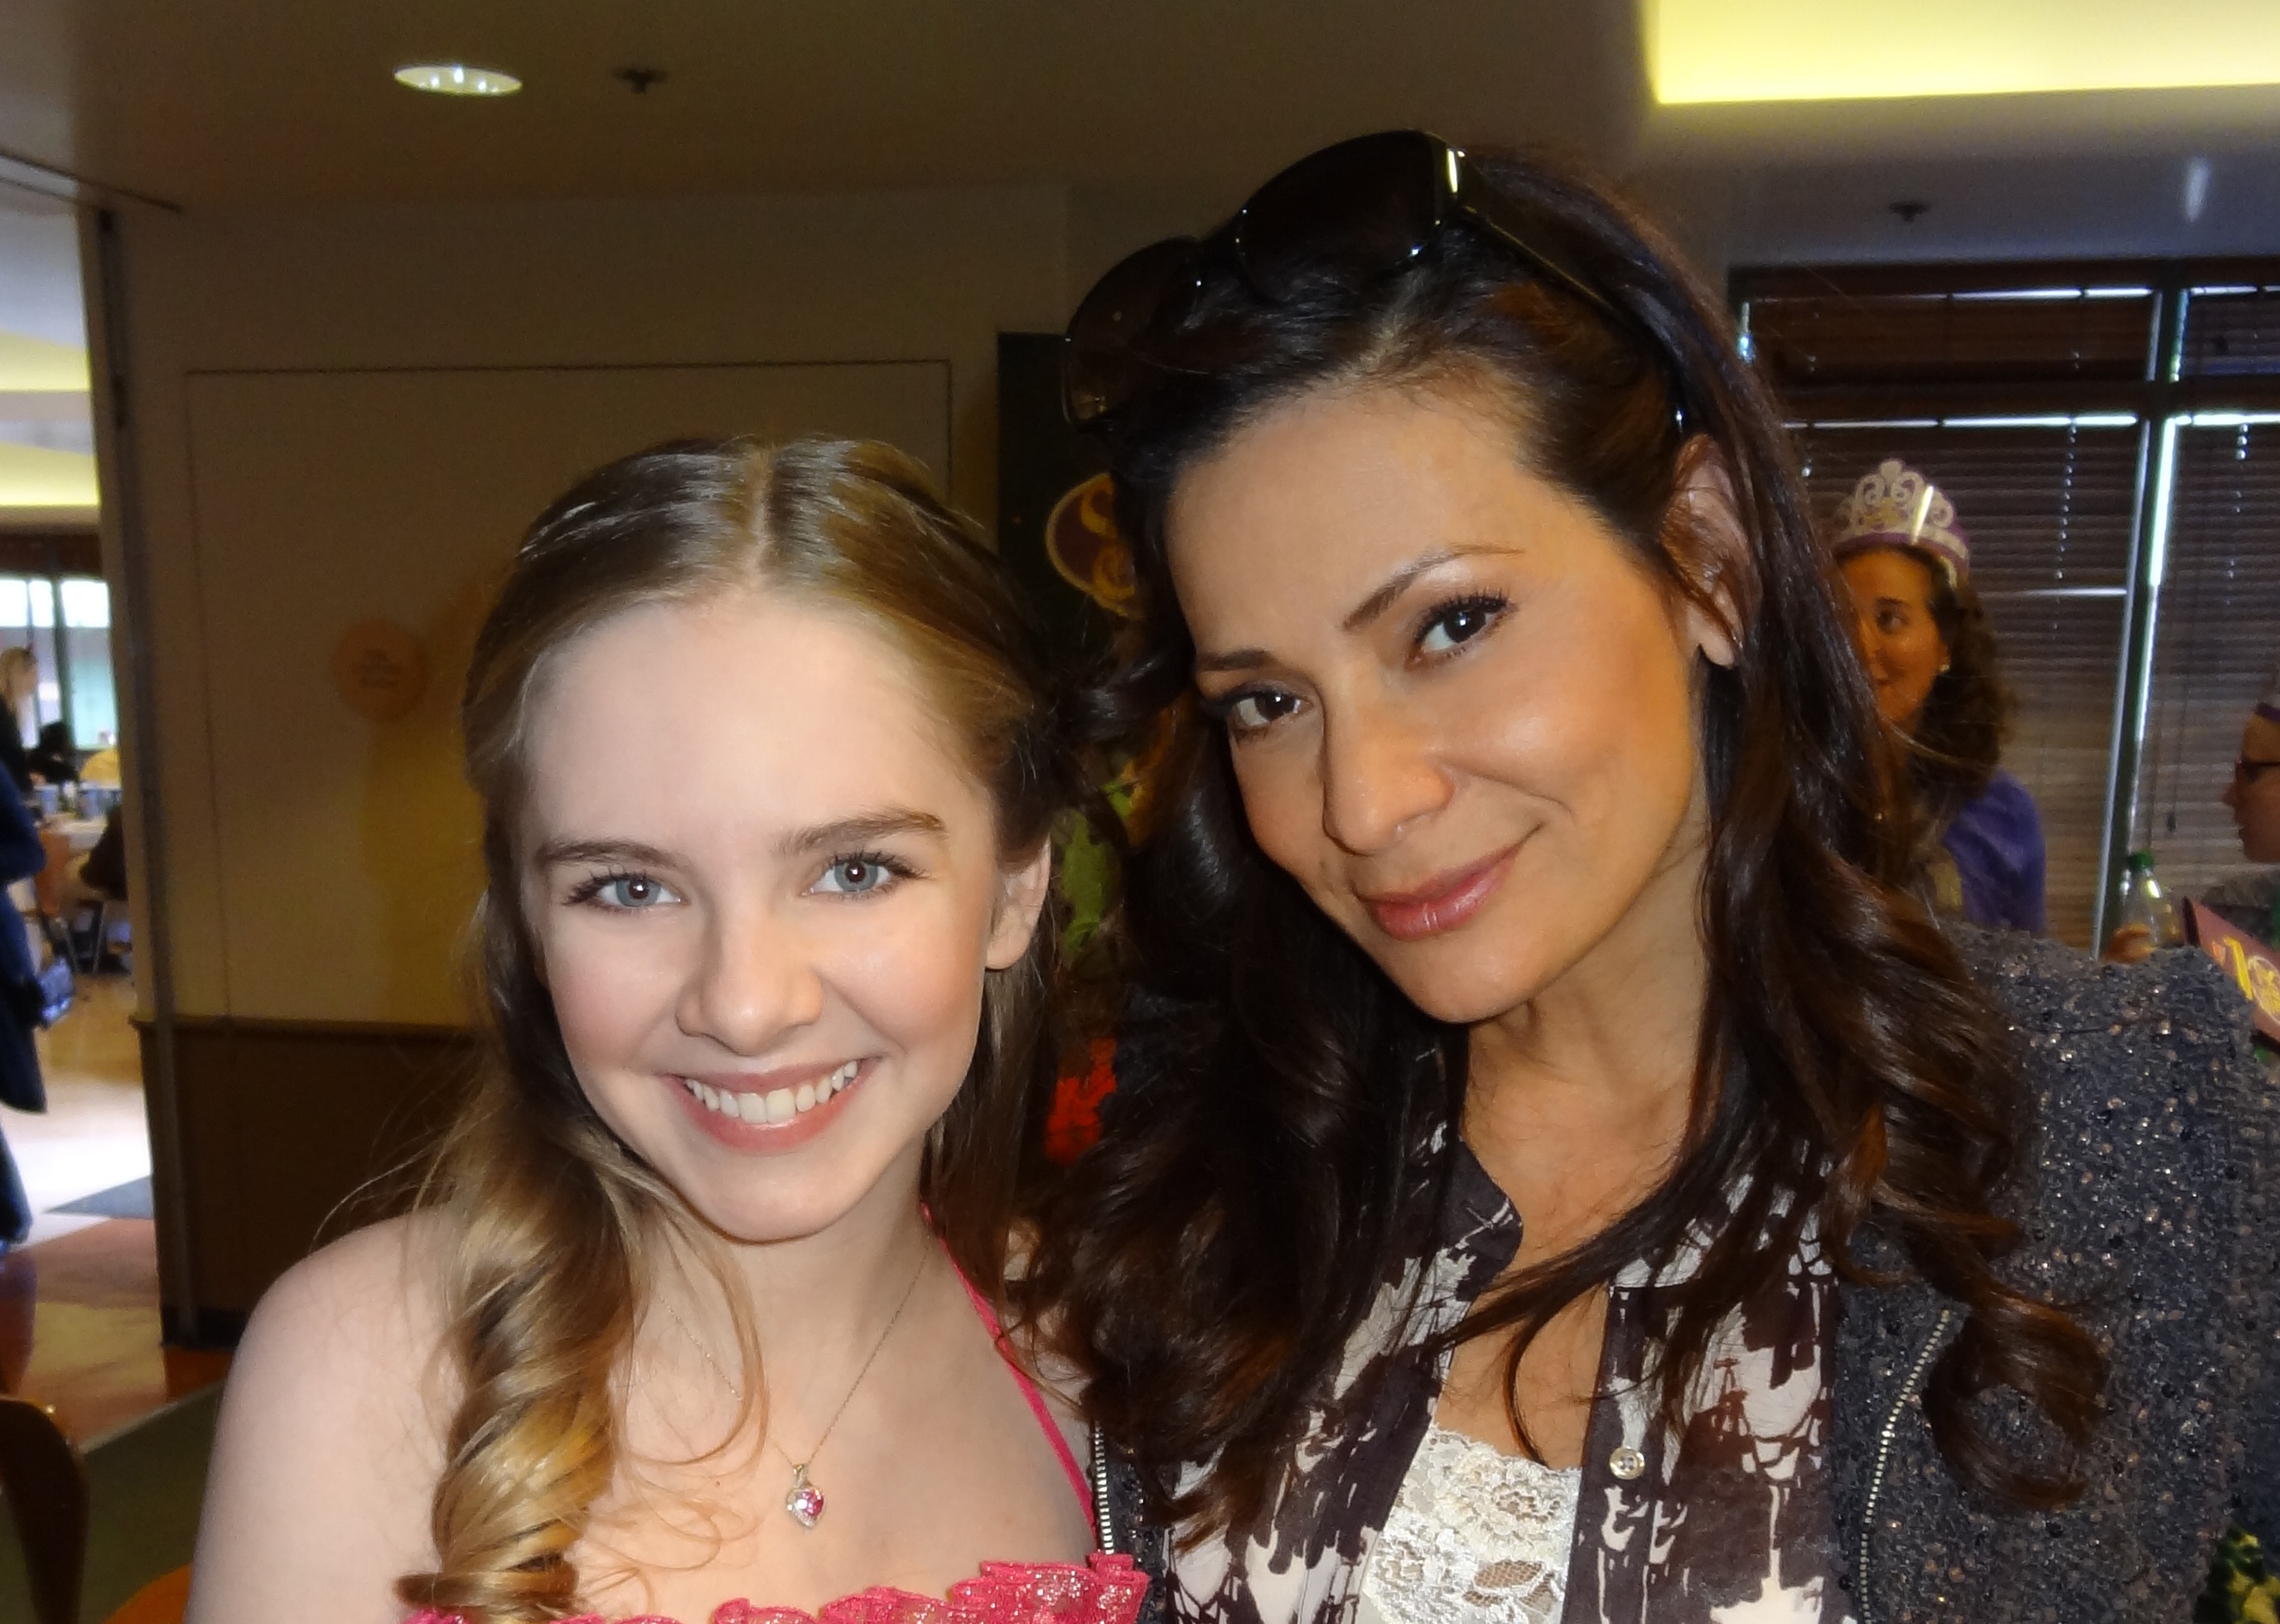 SOFIA THE FIRST'S Darcy Rose Byrnes (Princess Amber) with SWITCHED AT BIRTH'S Constance Marie @ SOFIA THE FIRST: ONCE UPON A PRINCESS Premiere (Dec 2012)